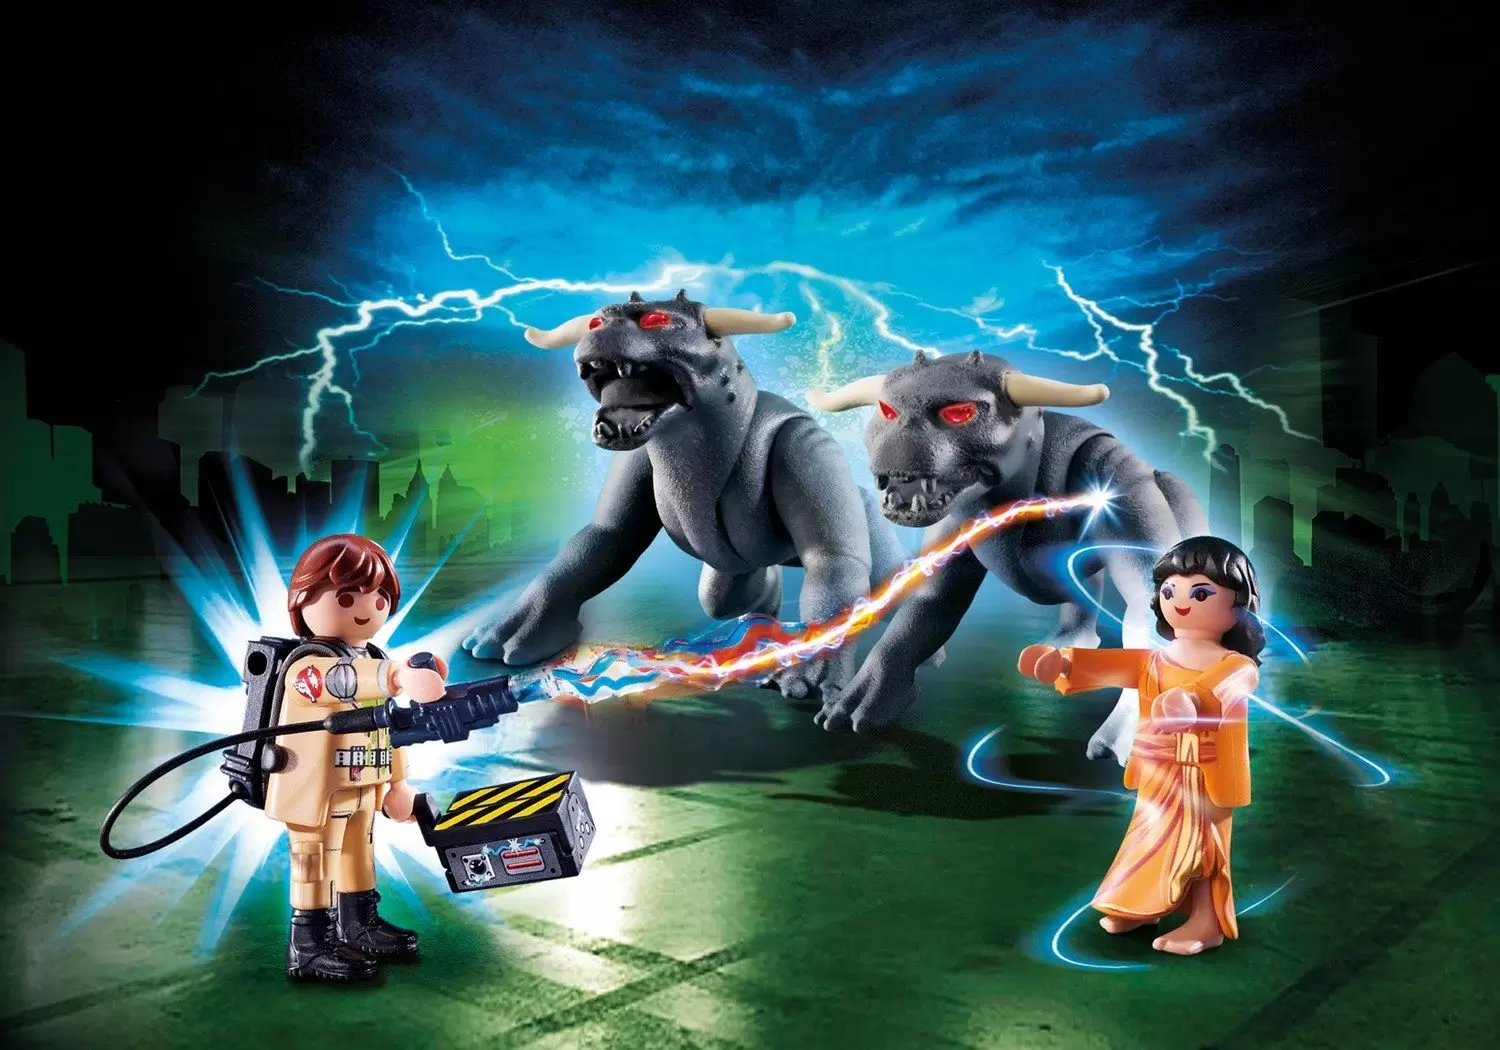 Playmobil Ghosbusters - Venkman and Terror Dogs